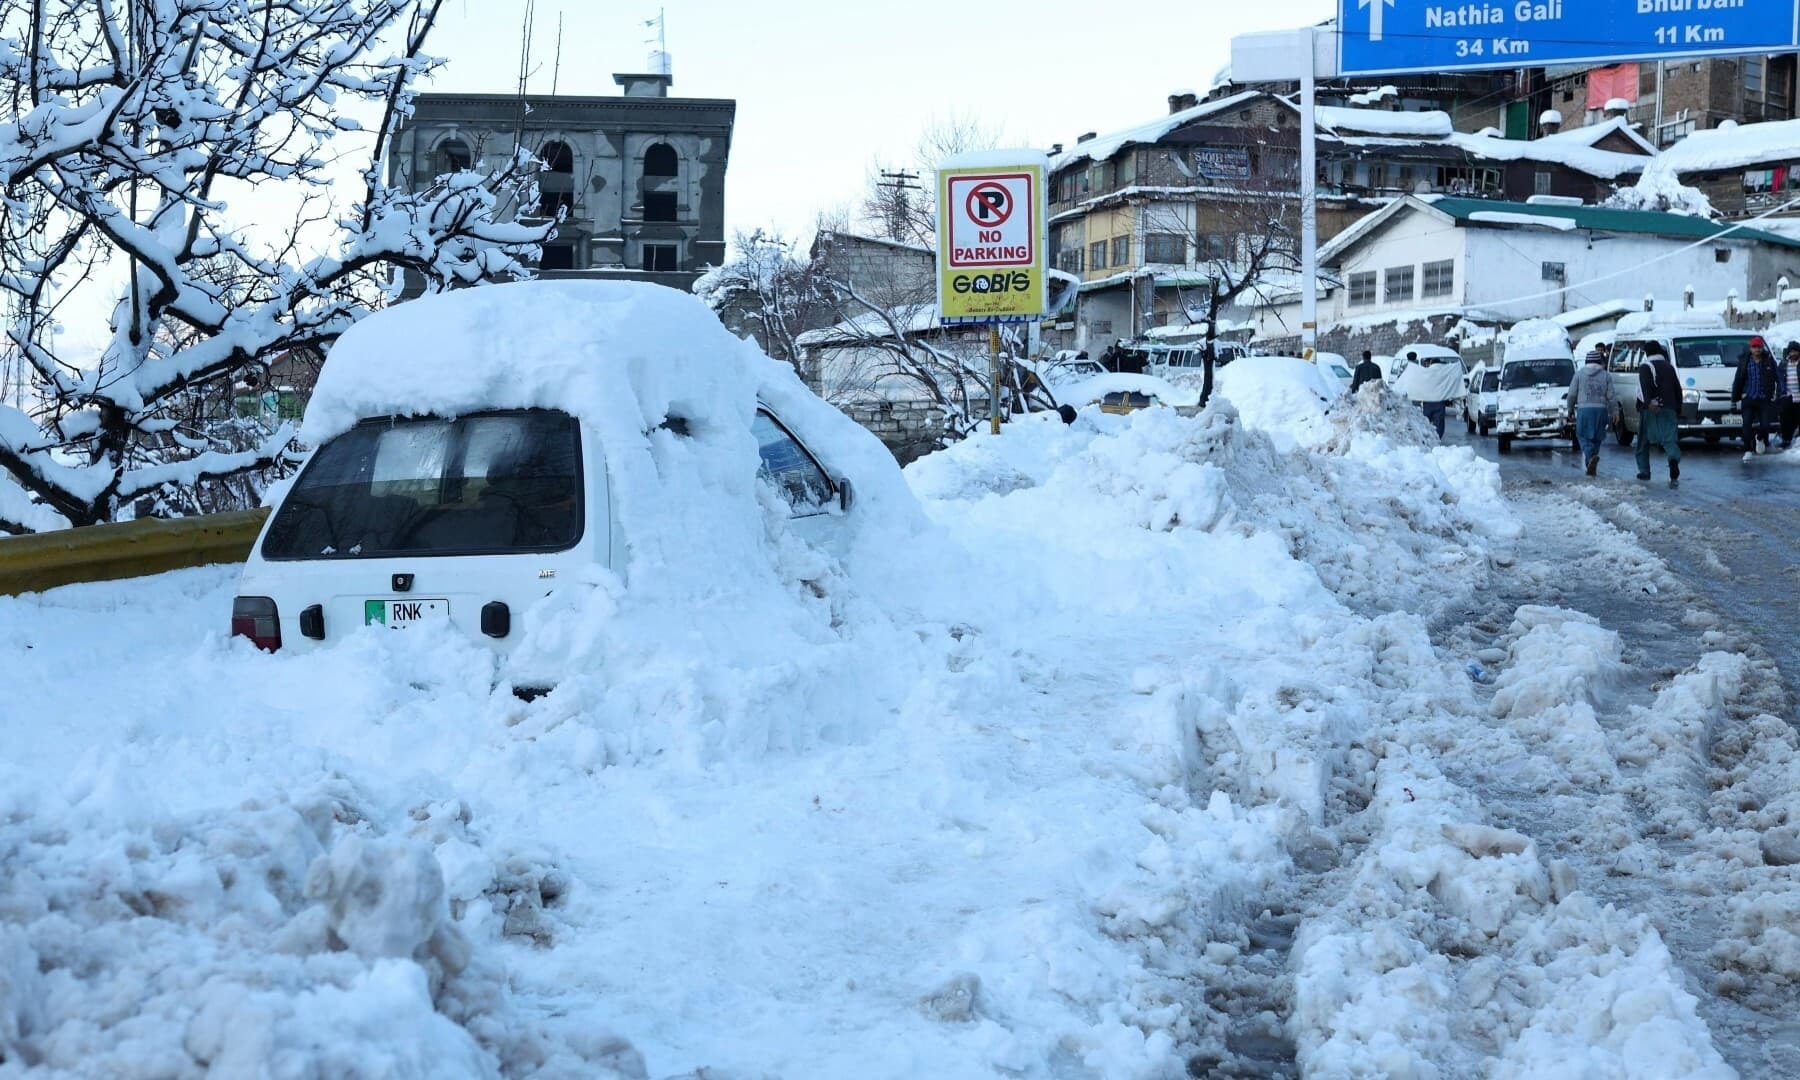 A vehicle is pictured after getting stuck in snow along a road after a heavy snowfall in Murree on January 8. — AFP